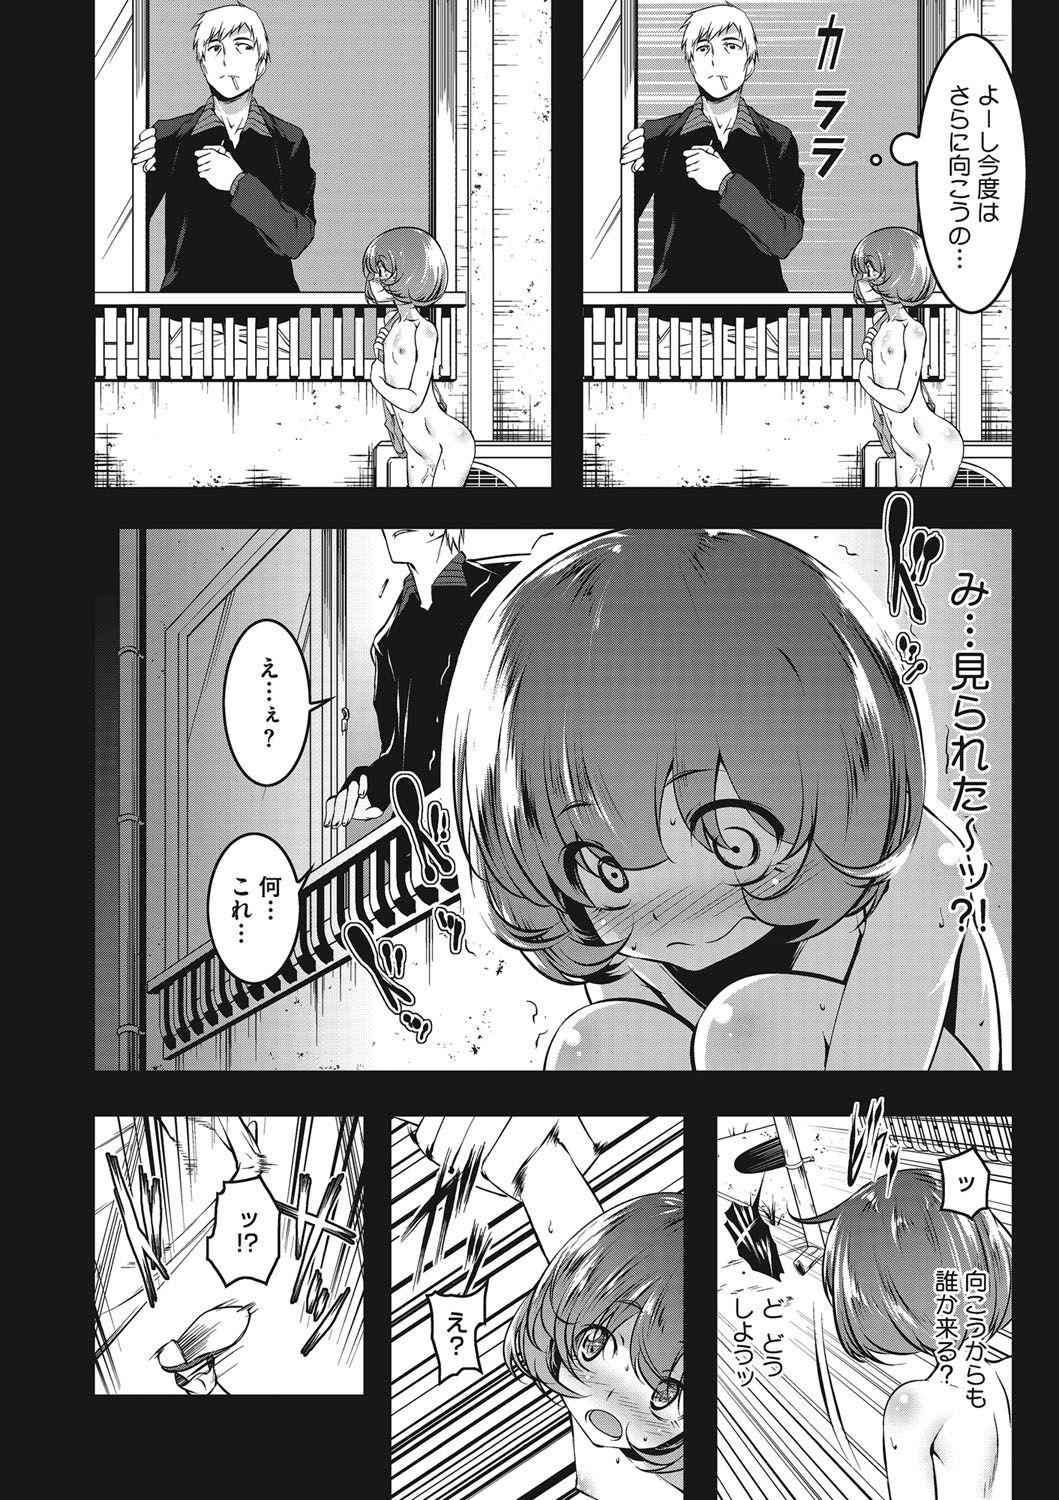 Russia [Anthology] LQ -Little Queen- Vol. 11 [Digital] Flashing - Page 13